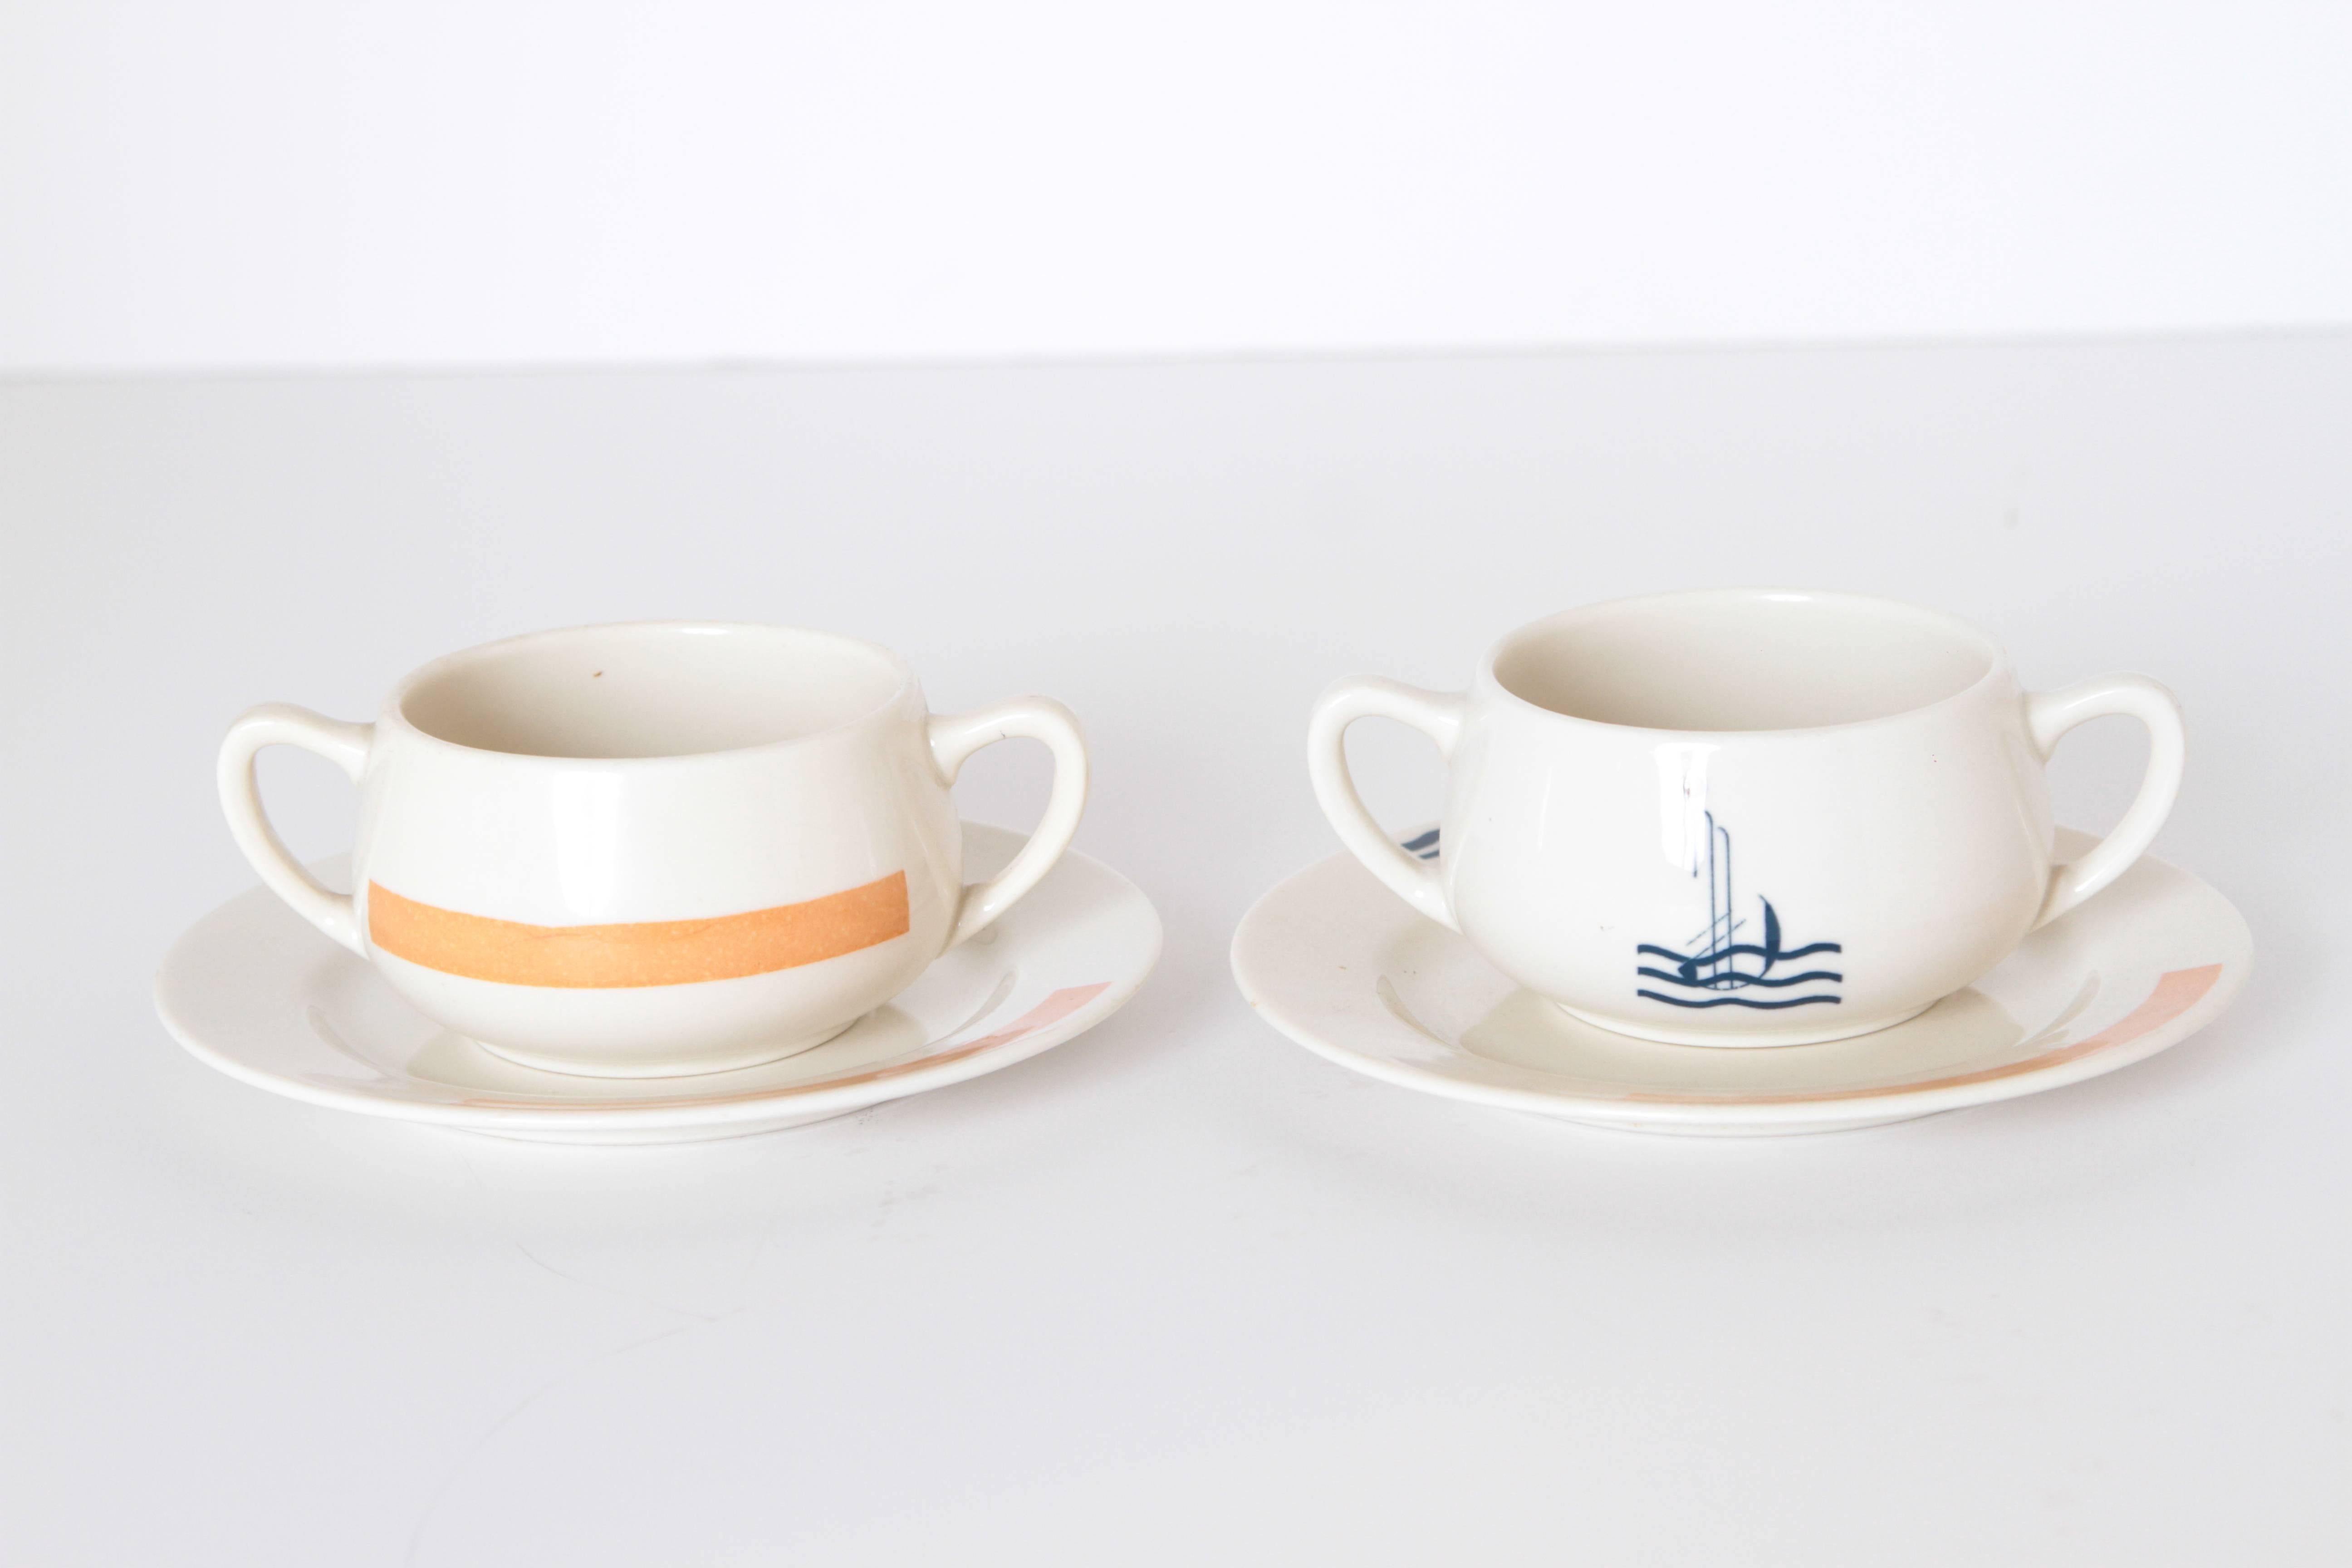 Machine Age Art Deco Eugene Schoen Pair Signed Leviathan Cruise Ship Serveware.  Streamline modernist ceramic.
2 matched cup/saucer pairs (4 pieces total) available.

Difficult to source small plate and bouillon bowl for the iconic SS Leviathan